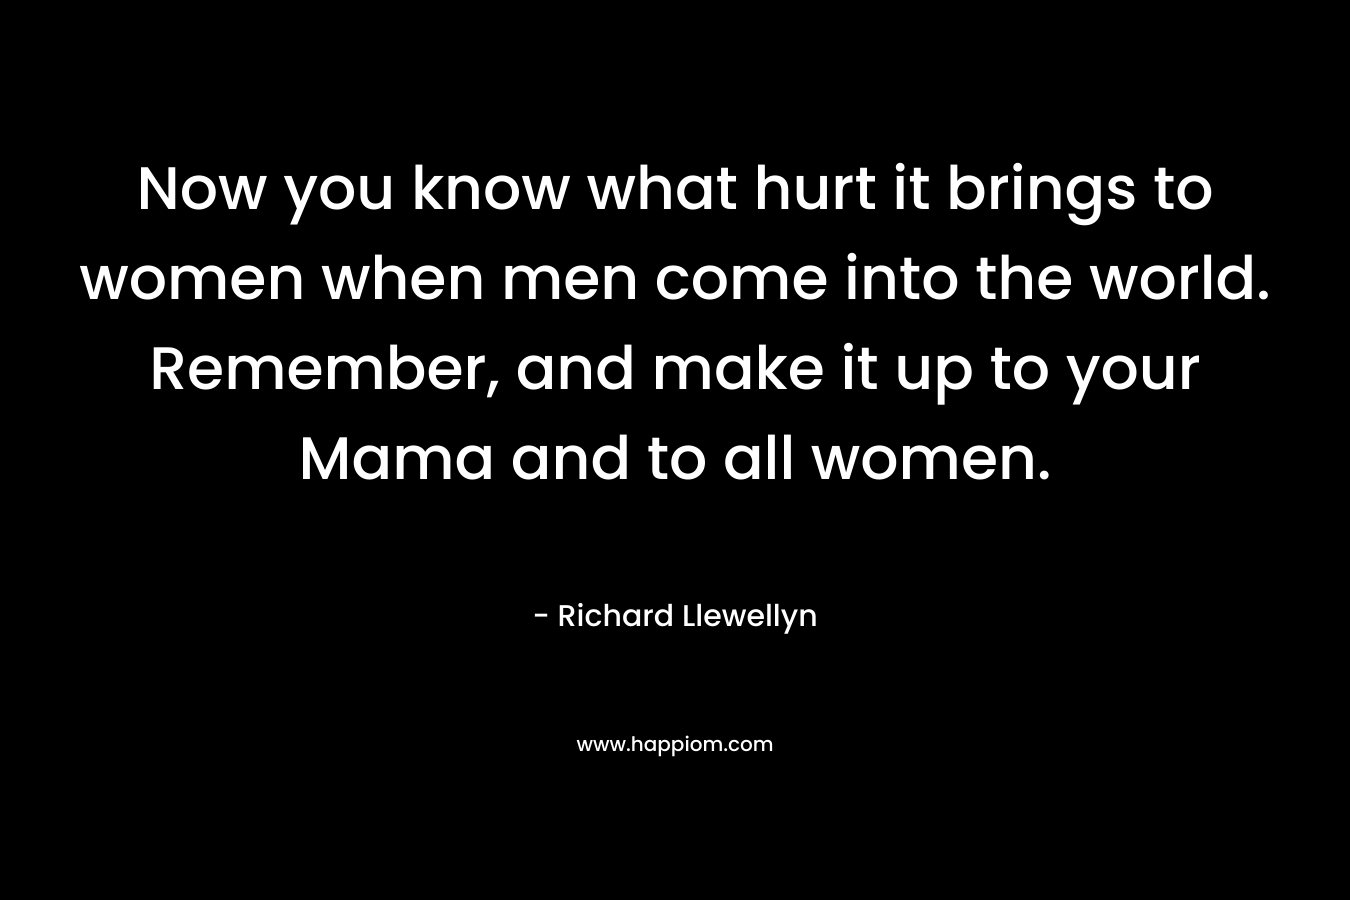 Now you know what hurt it brings to women when men come into the world. Remember, and make it up to your Mama and to all women. – Richard Llewellyn